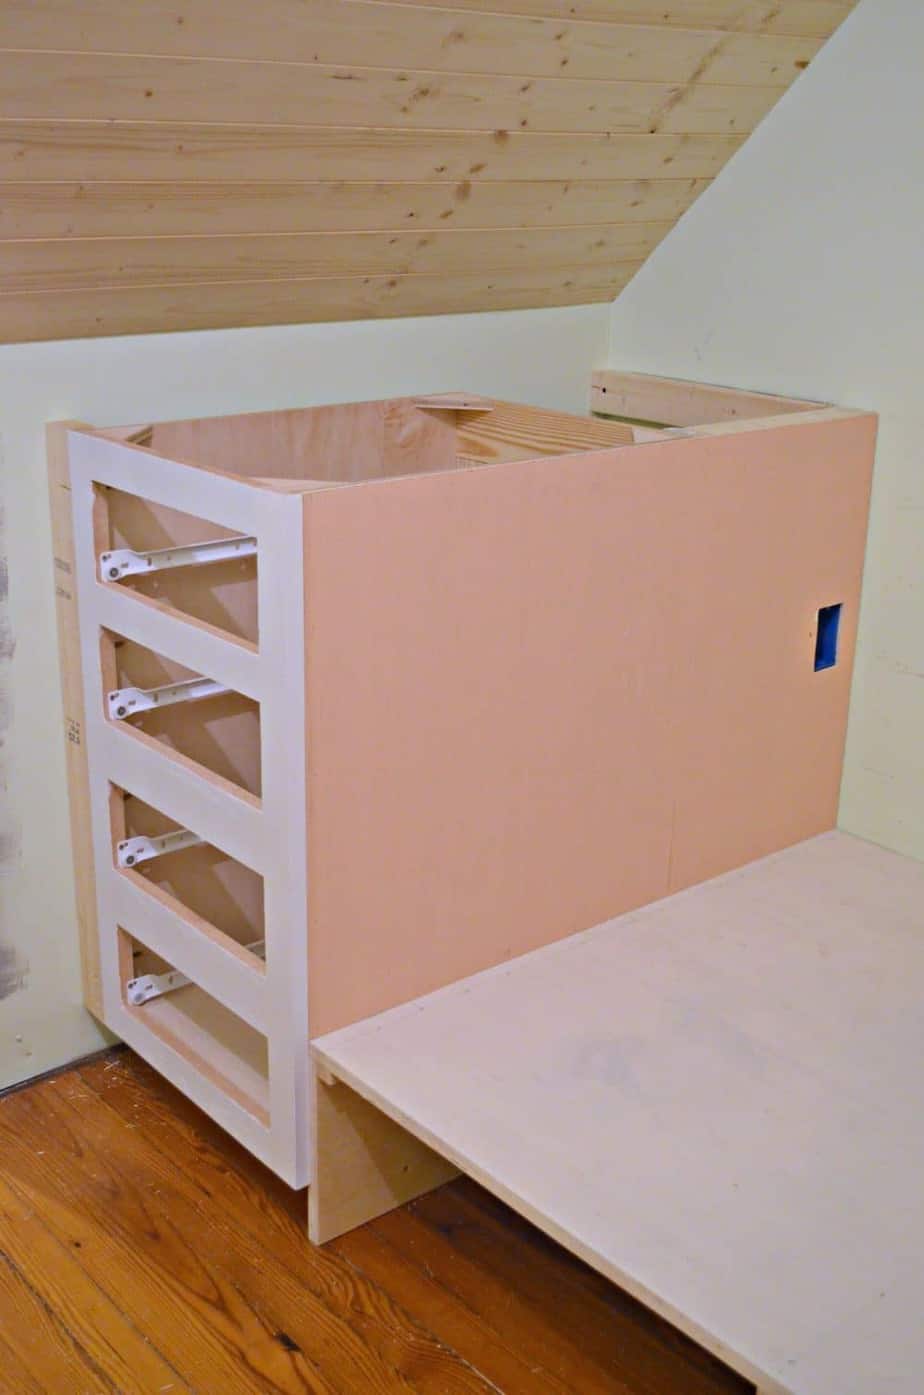 How to make a built-in bed using stock kitchen cabinets